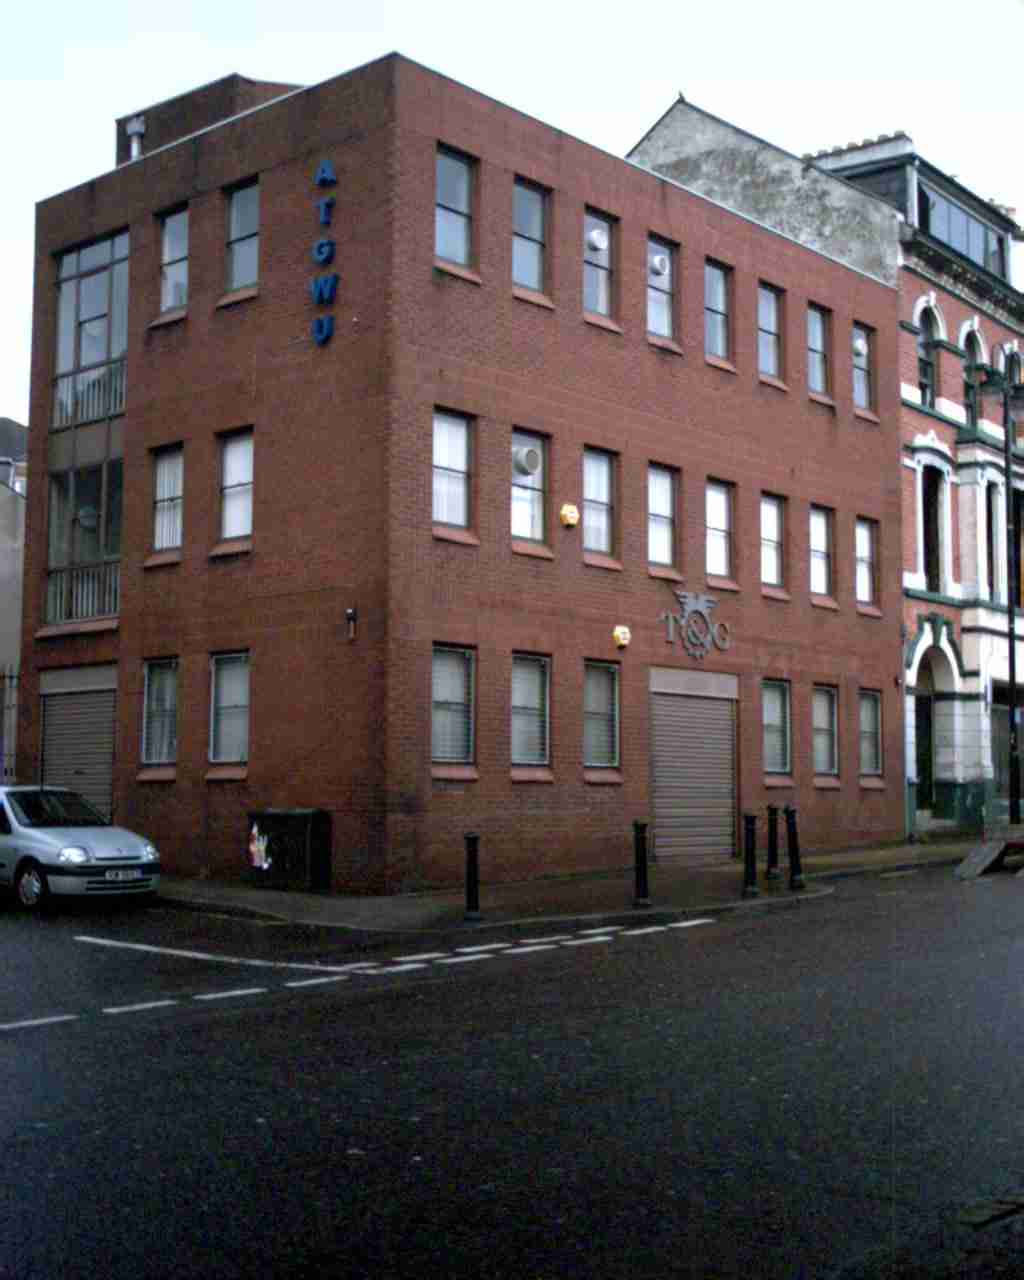 This is a photograph of the site formerly cccupied by the Northern shirt factory. It is now occupied by a Trade Union office.